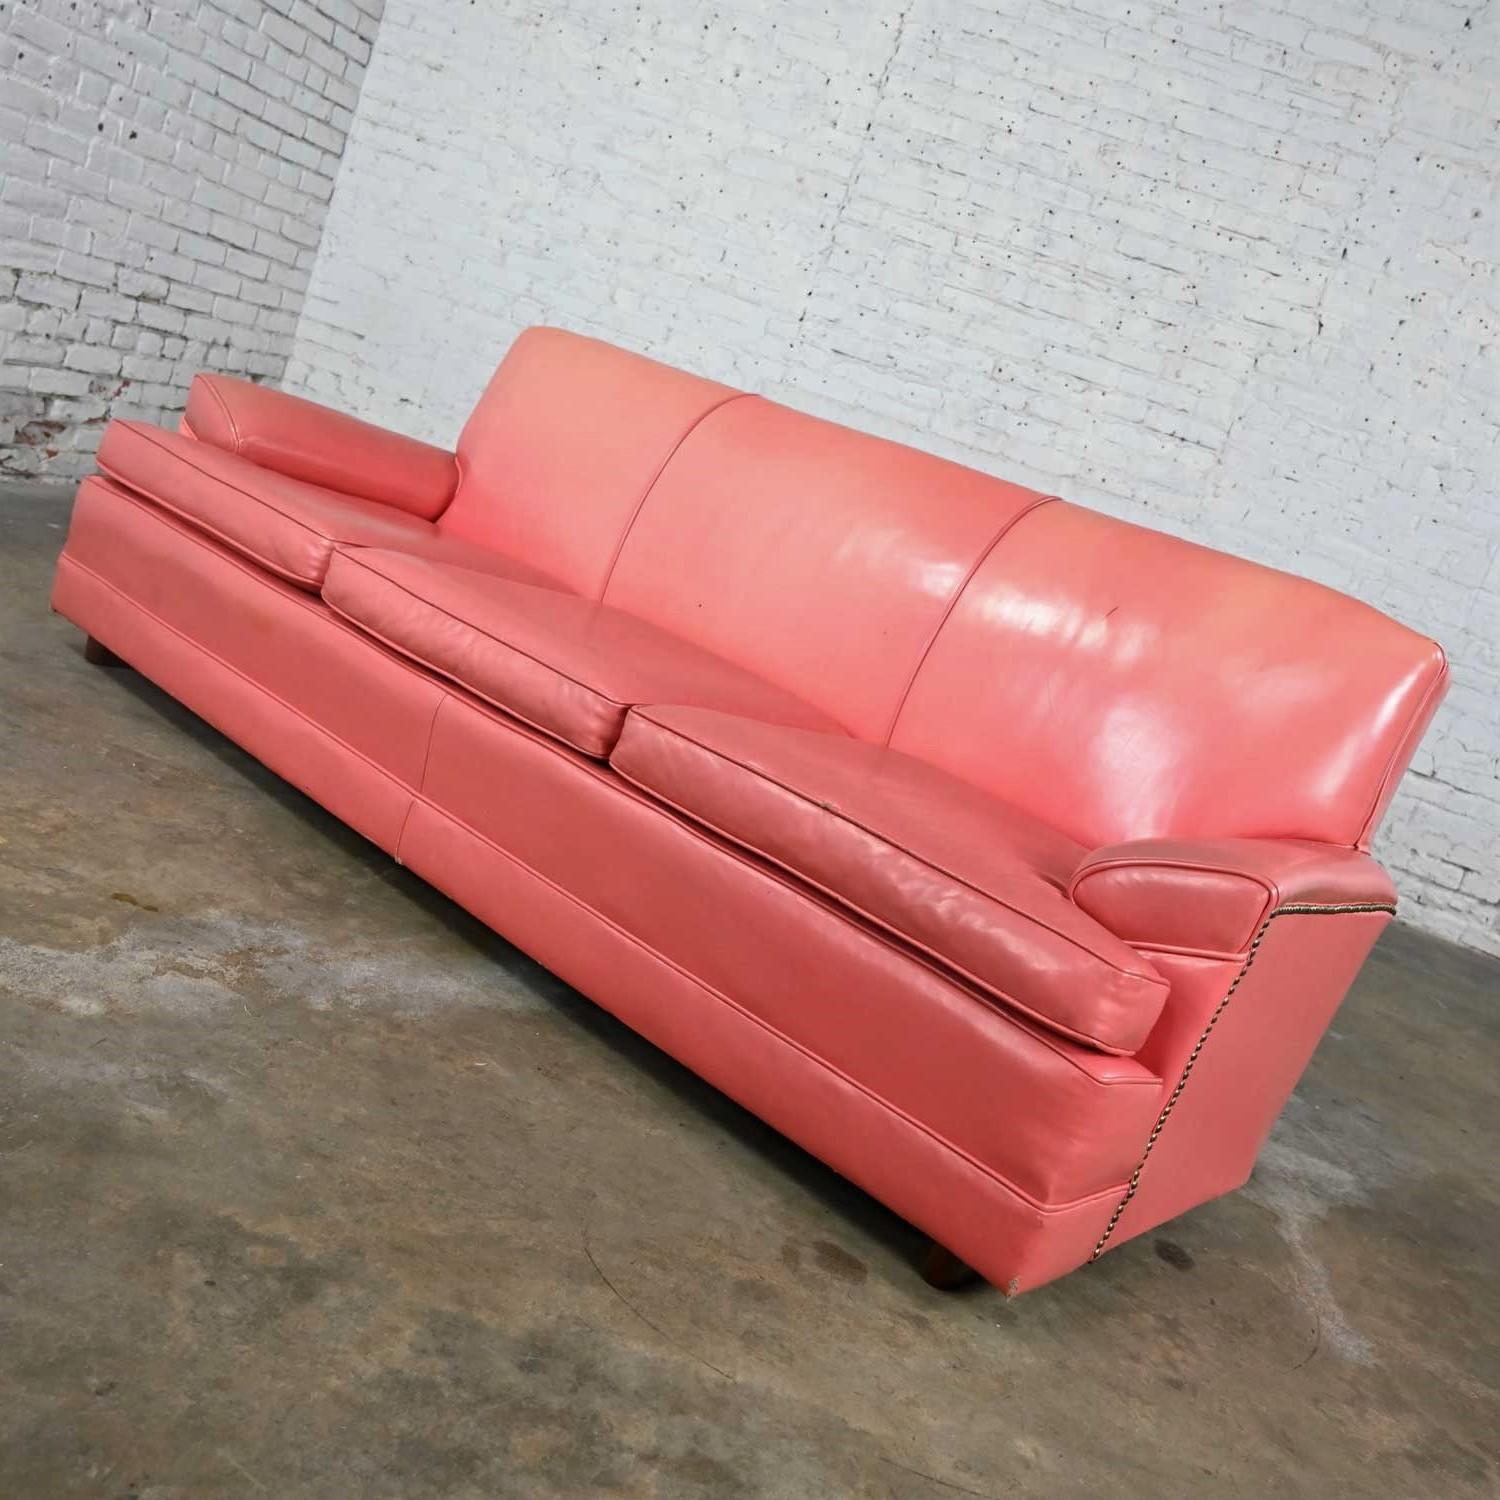 Unknown Vintage Hollywood Regency Art Deco Sofa with Original Pink Distressed Leather